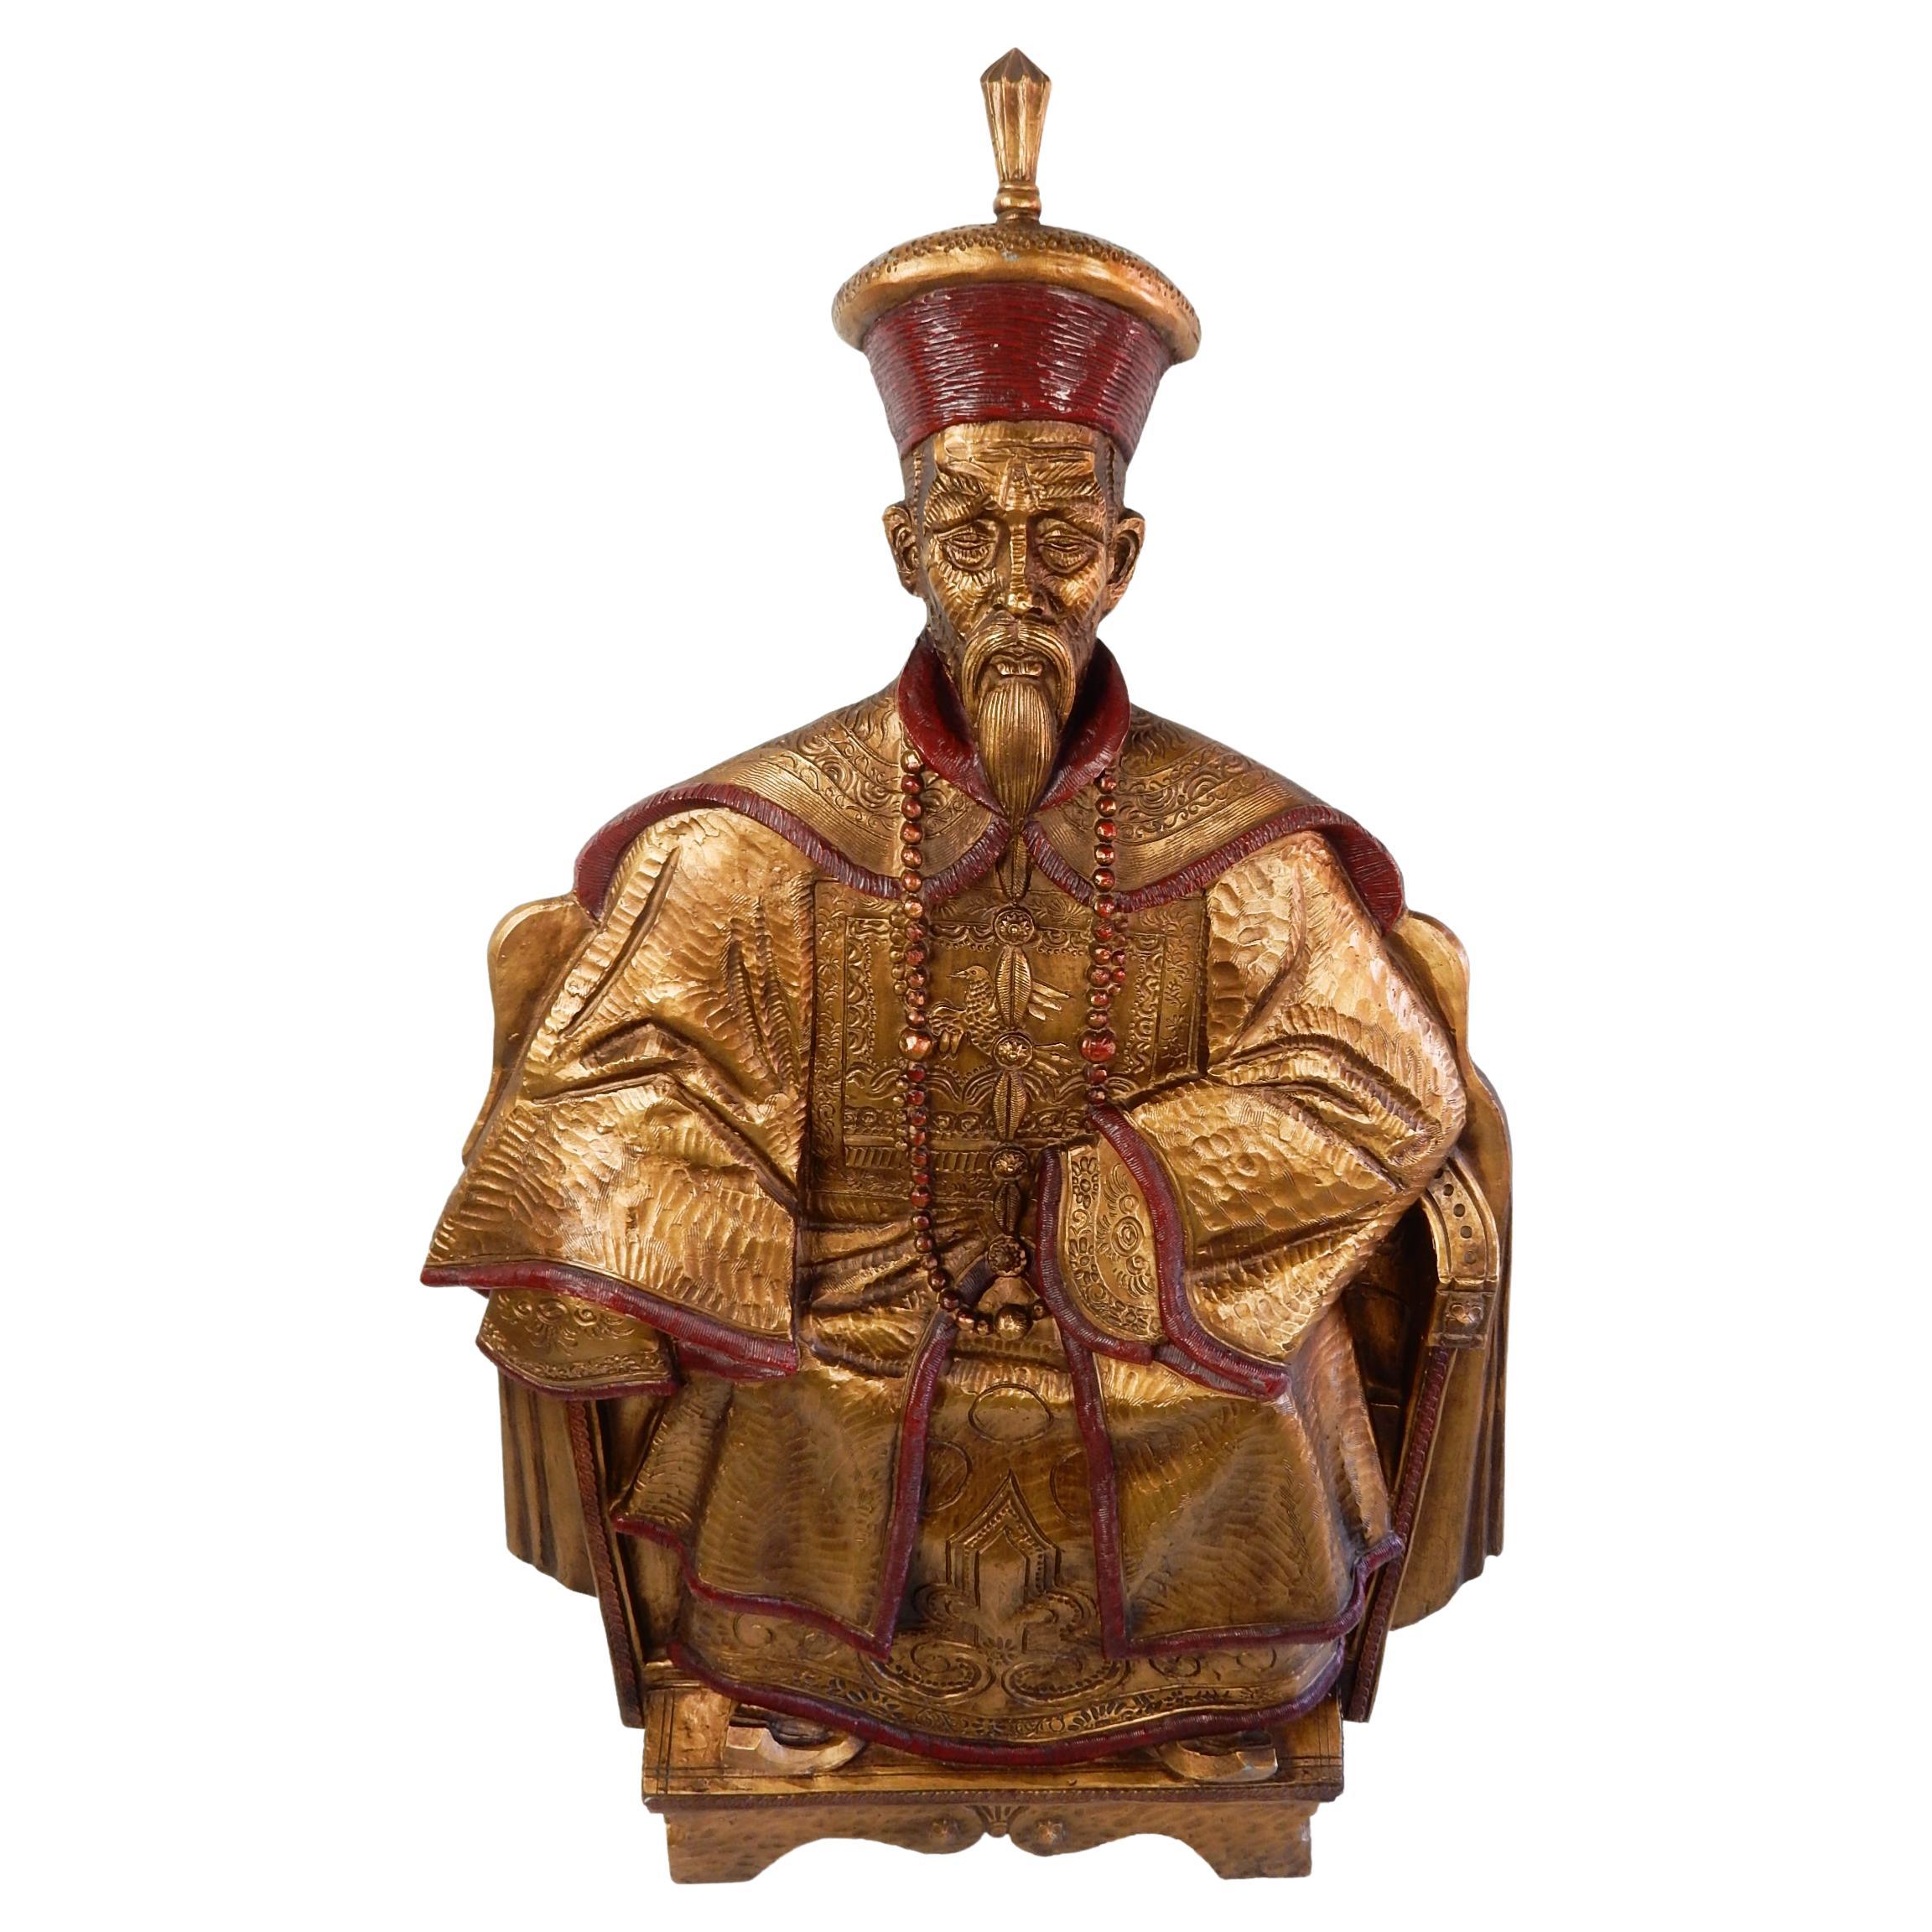 Metal Chinese Emperor on Throne Wall Art Sculpture by Pezzella, 1960s